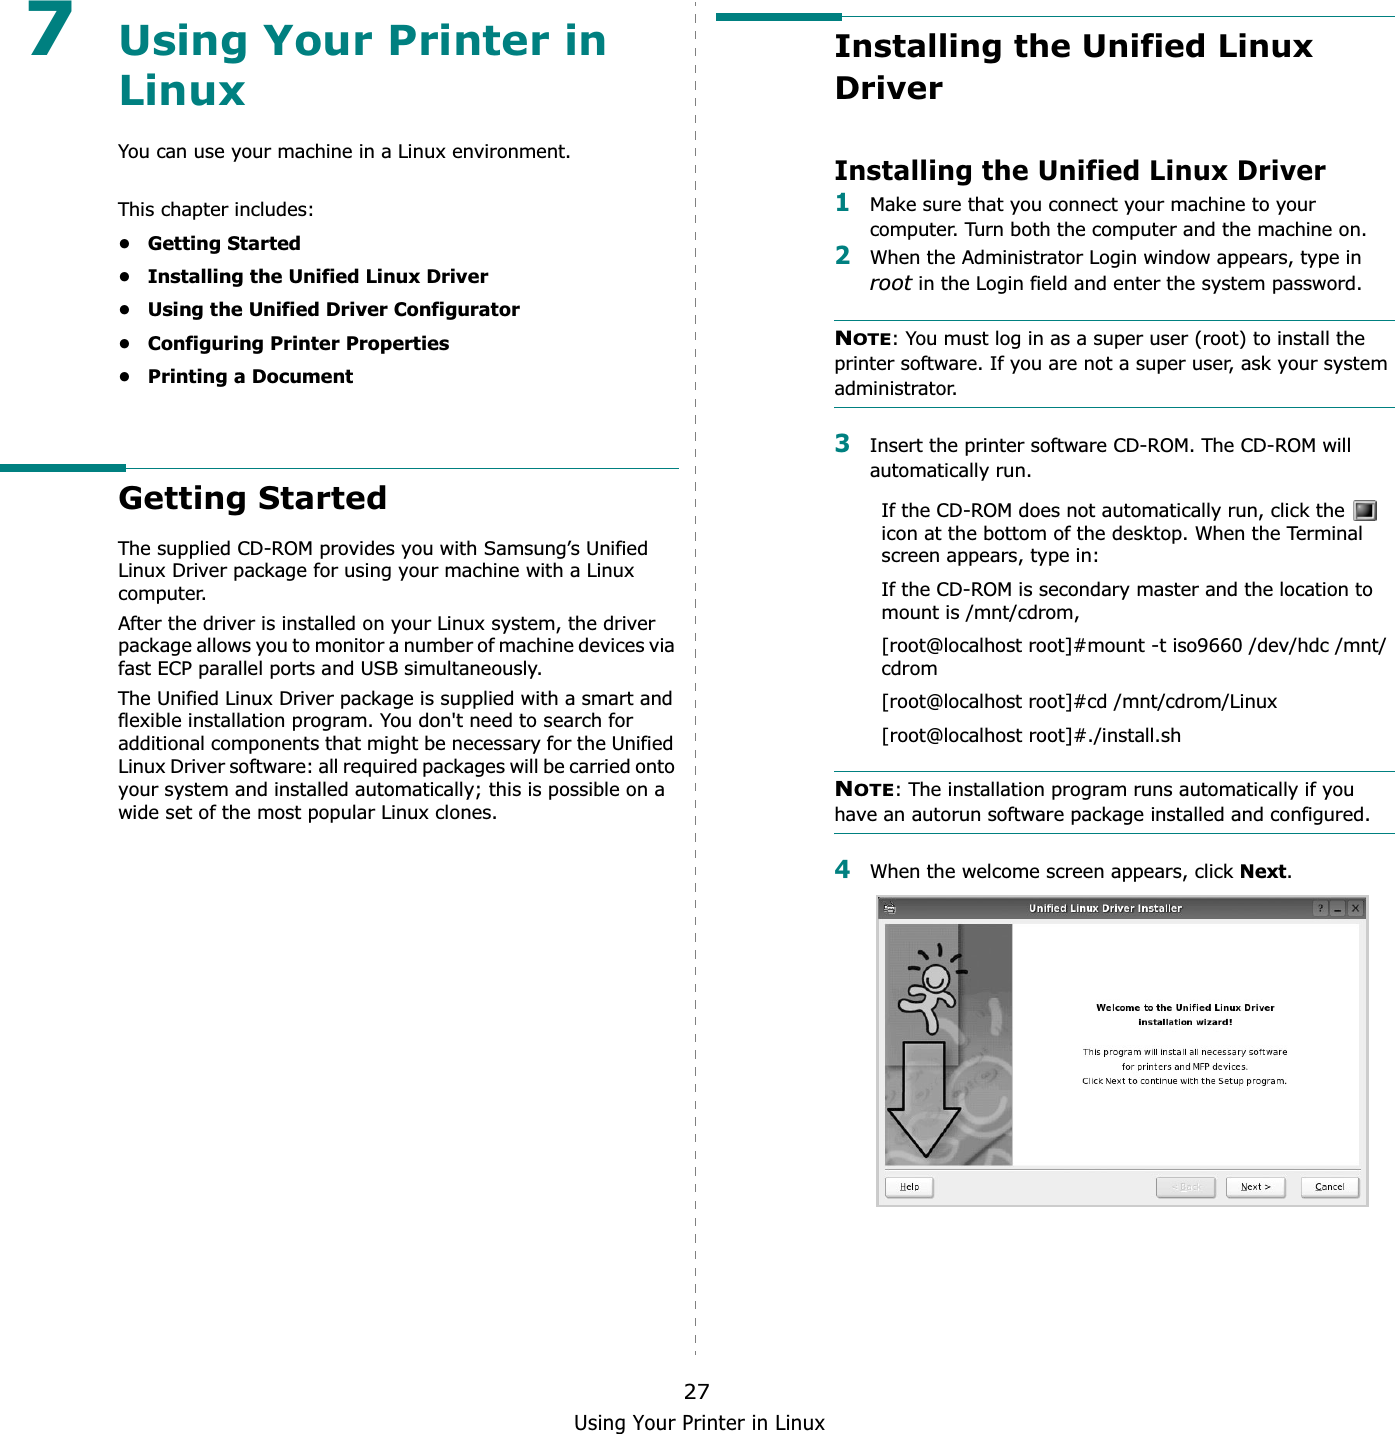 Using Your Printer in Linux277Using Your Printer in LinuxYou can use your machine in a Linux environment. This chapter includes:• Getting Started• Installing the Unified Linux Driver• Using the Unified Driver Configurator• Configuring Printer Properties• Printing a DocumentGetting StartedThe supplied CD-ROM provides you with Samsung’s Unified Linux Driver package for using your machine with a Linux computer.After the driver is installed on your Linux system, the driver package allows you to monitor a number of machine devices via fast ECP parallel ports and USB simultaneously. The Unified Linux Driver package is supplied with a smart and flexible installation program. You don&apos;t need to search for additional components that might be necessary for the Unified Linux Driver software: all required packages will be carried onto your system and installed automatically; this is possible on a wide set of the most popular Linux clones.Installing the Unified Linux DriverInstalling the Unified Linux Driver1Make sure that you connect your machine to your computer. Turn both the computer and the machine on.2When the Administrator Login window appears, type in root in the Login field and enter the system password.NOTE: You must log in as a super user (root) to install the printer software. If you are not a super user, ask your system administrator.3Insert the printer software CD-ROM. The CD-ROM will automatically run.If the CD-ROM does not automatically run, click the   icon at the bottom of the desktop. When the Terminal screen appears, type in:If the CD-ROM is secondary master and the location to mount is /mnt/cdrom,[root@localhost root]#mount -t iso9660 /dev/hdc /mnt/cdrom[root@localhost root]#cd /mnt/cdrom/Linux[root@localhost root]#./install.sh NOTE: The installation program runs automatically if you have an autorun software package installed and configured.4When the welcome screen appears, click Next.